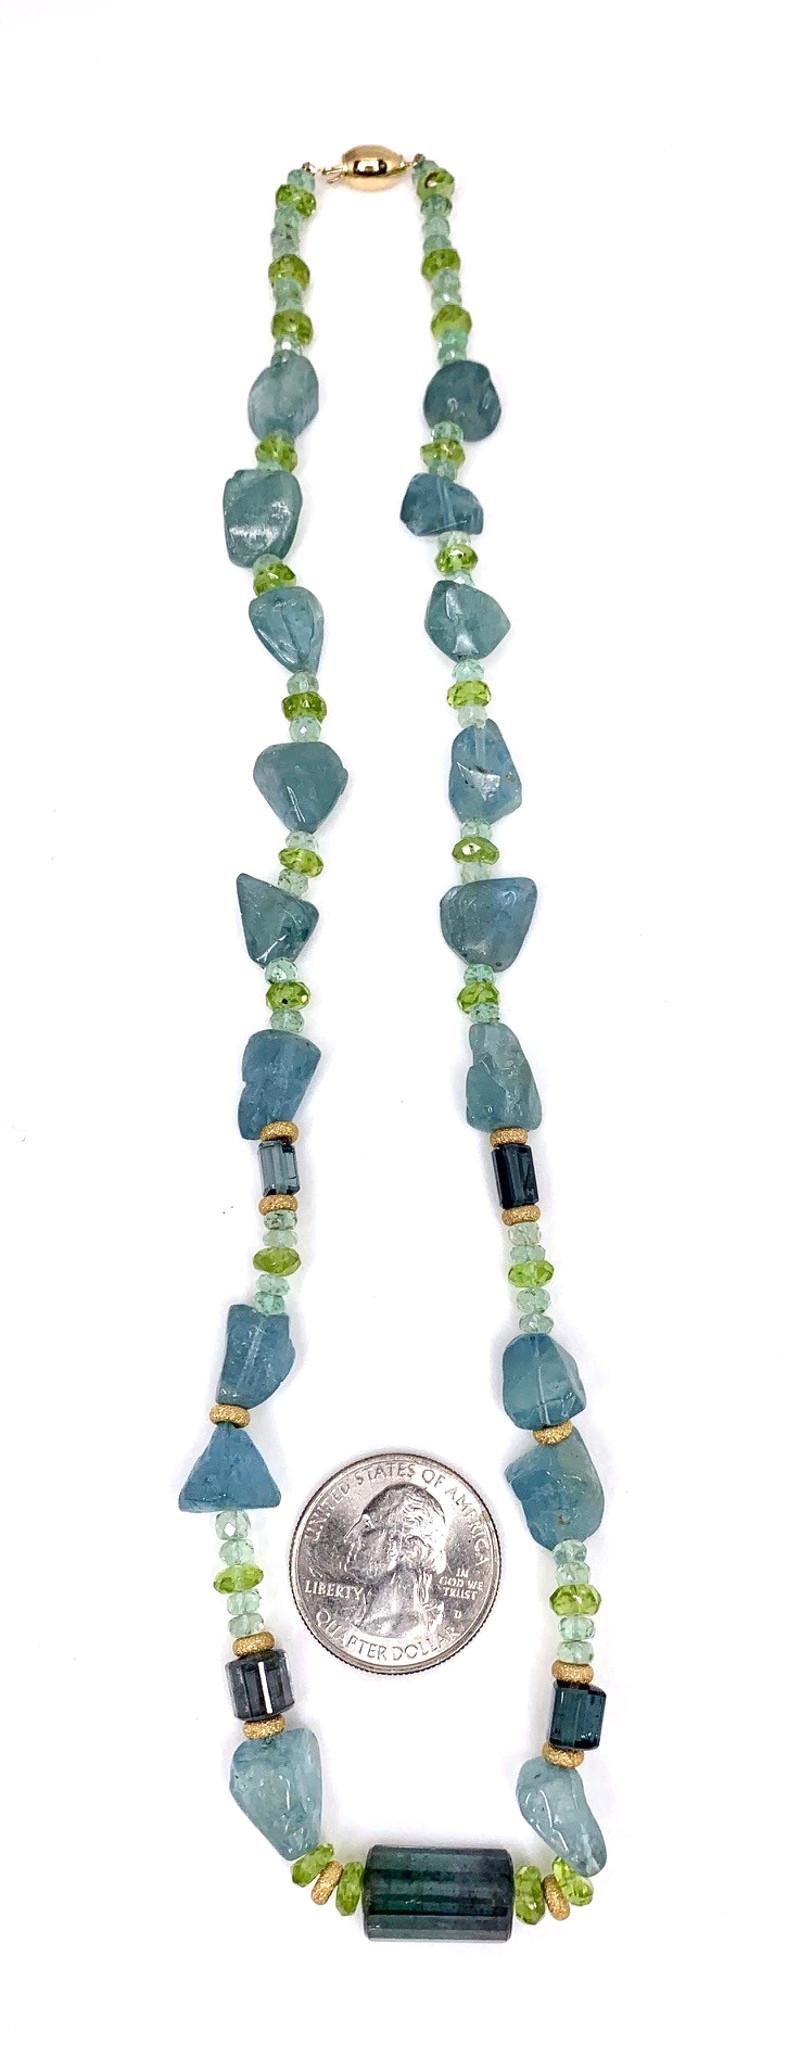 Aquamarine, Indicolite Tourmaline and Peridot Beaded Necklace with Gold Accents 2